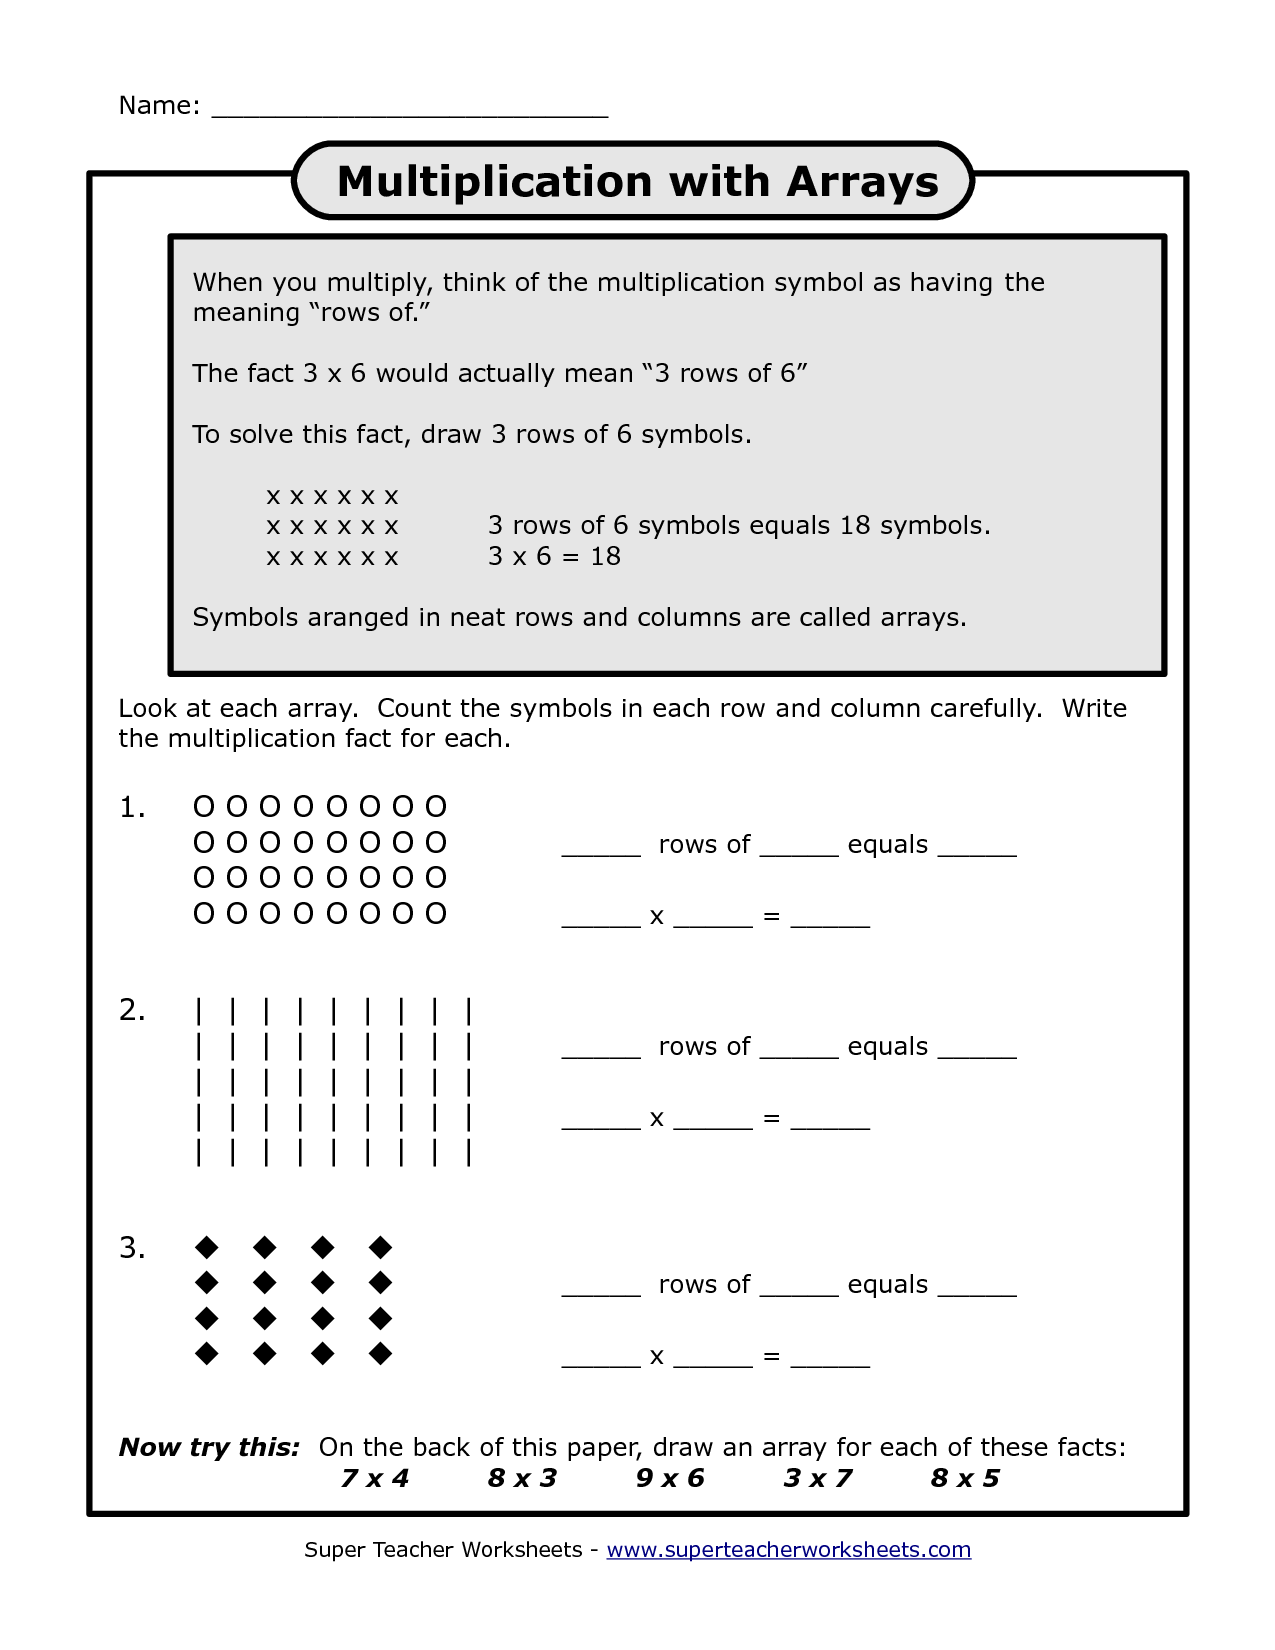 common-core-worksheets-3rd-grade-edition-create-teach-share-worksheet